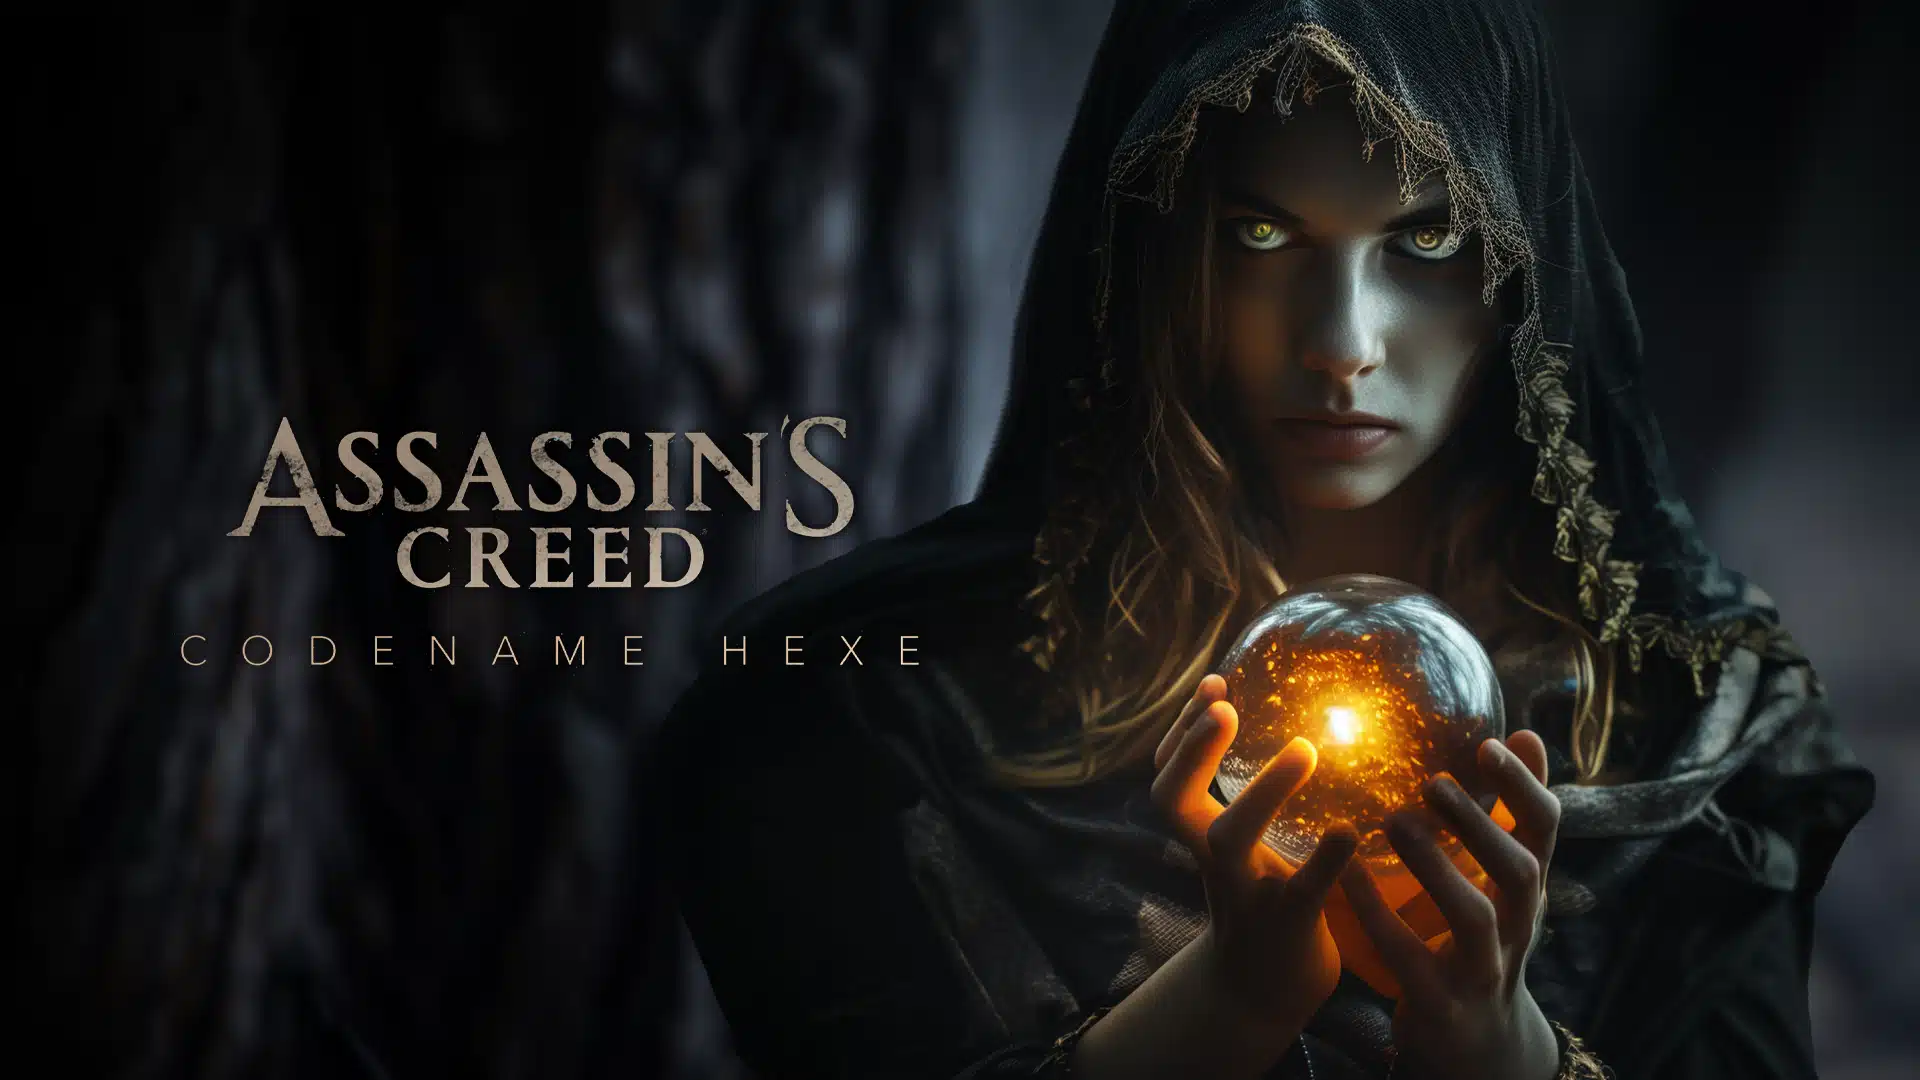 Hexe Assassin's Creed 